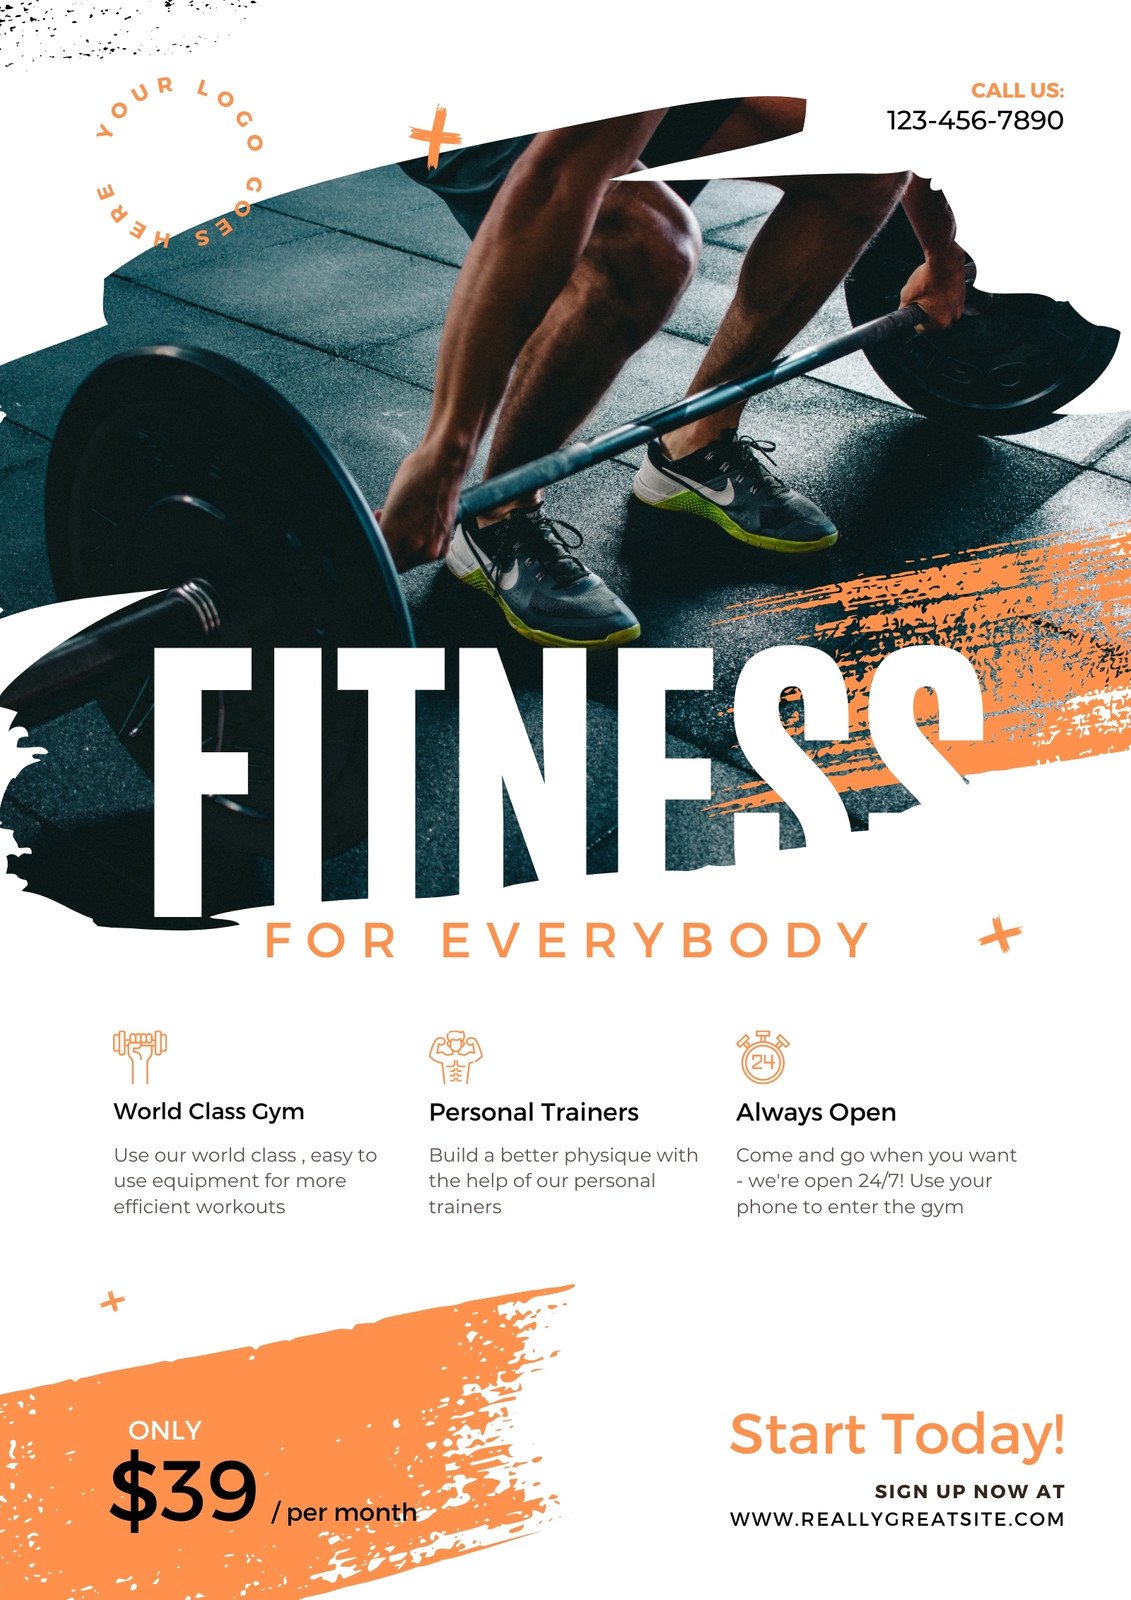 A flyer for a gym